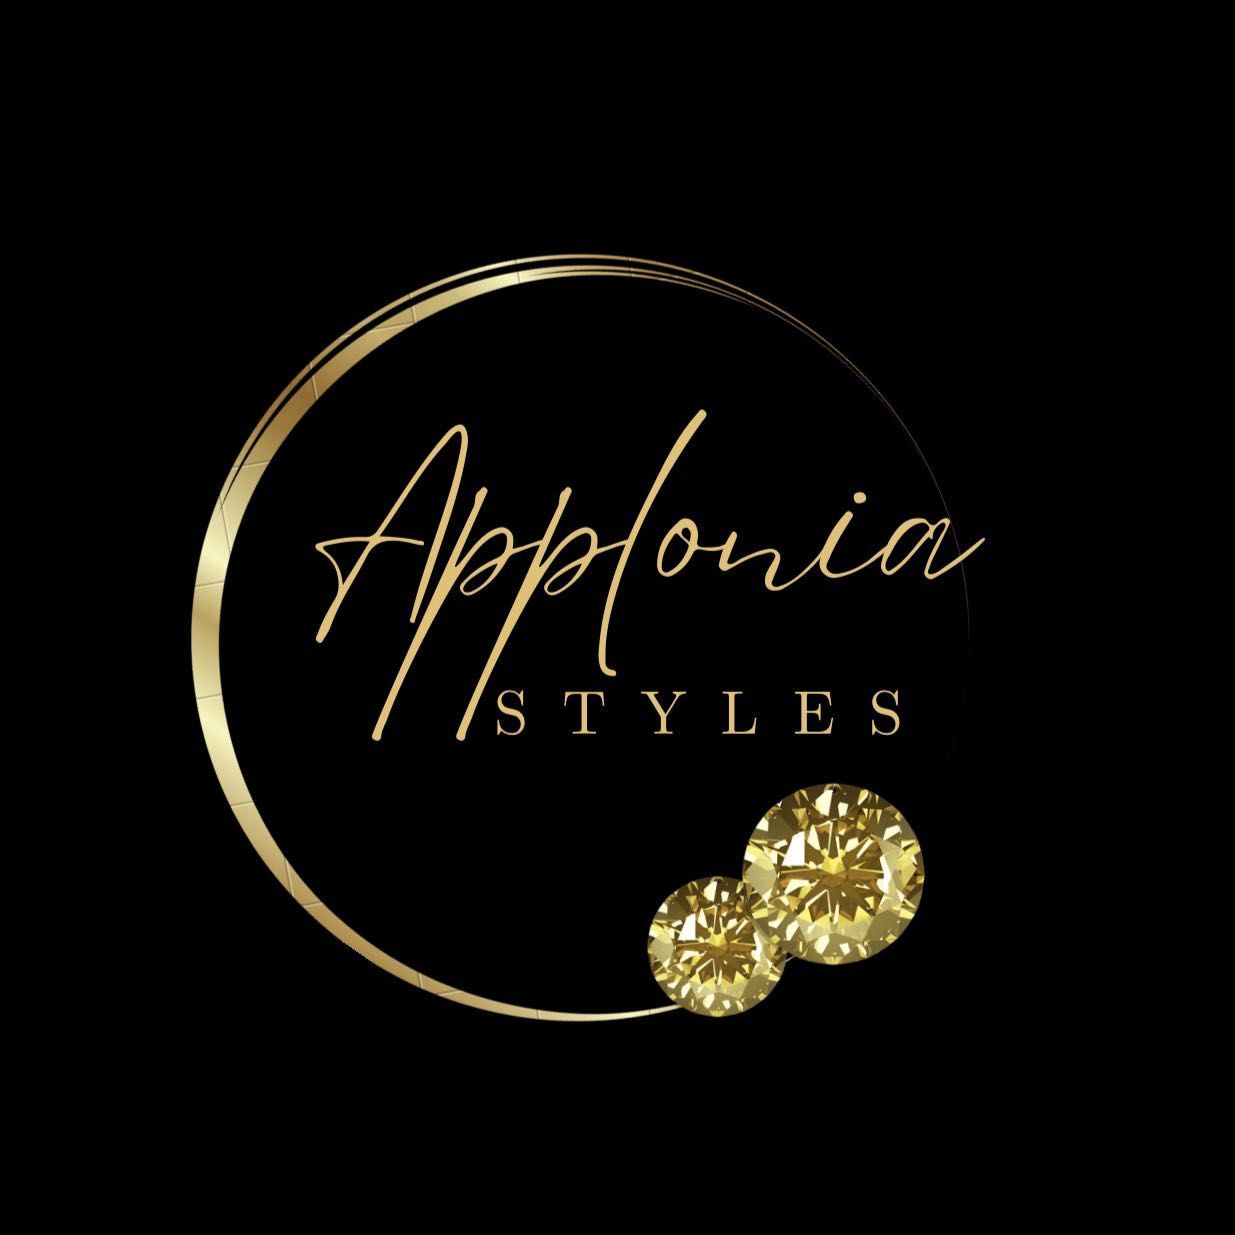 Applonia Styles, 6355 views trace dr, Norcross, 30092